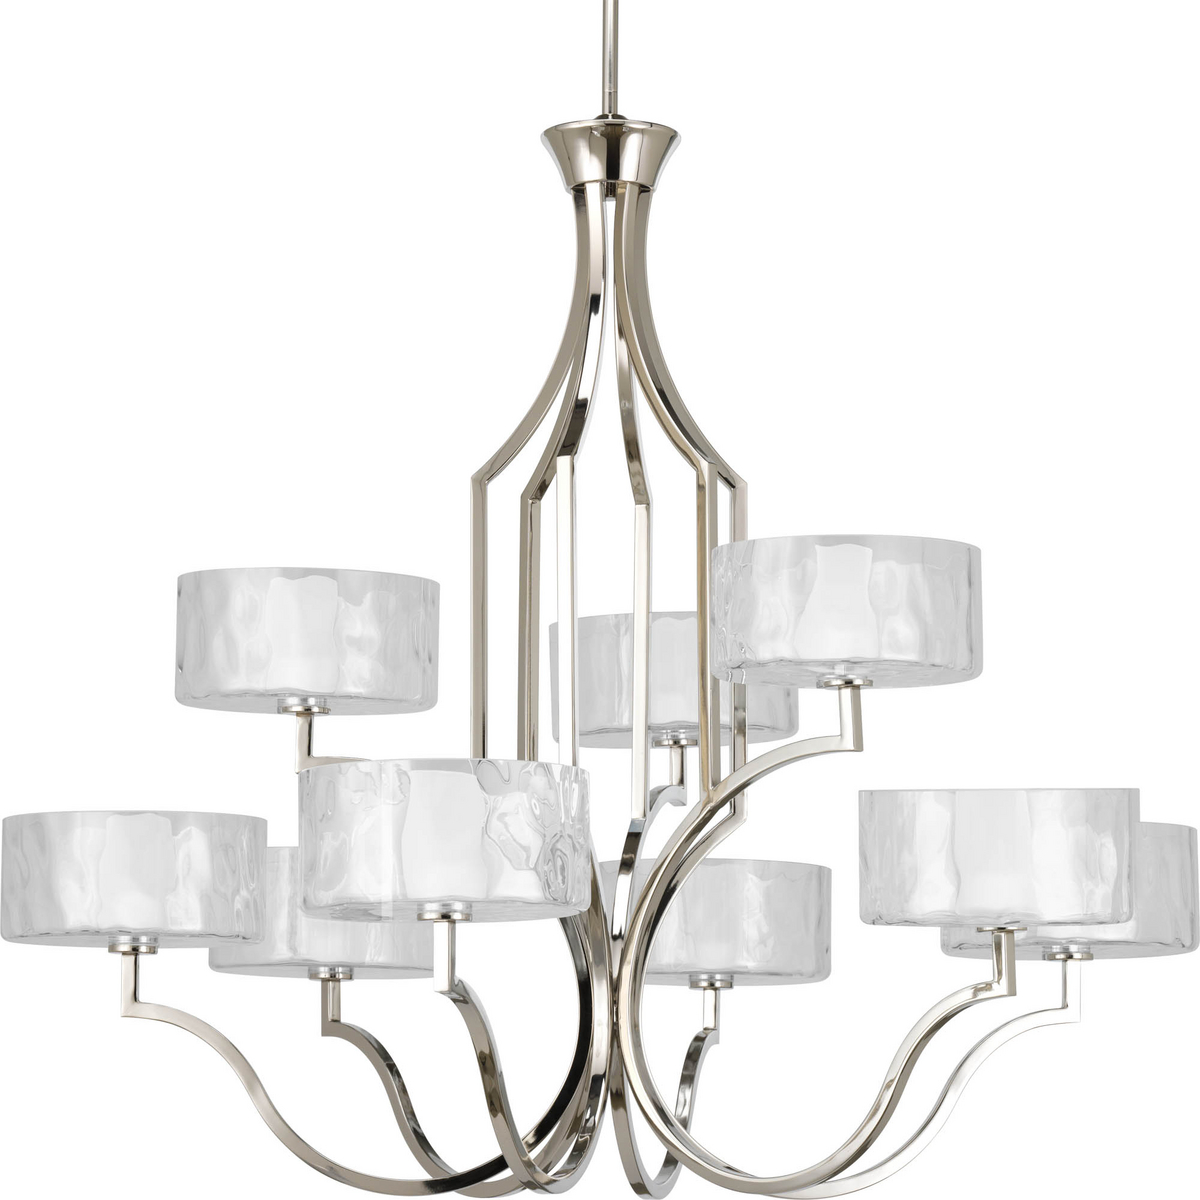 Nine-light, two tier chandelier. Caress features a chic, sophisticated nine-light, two-tier chandelier featuring a Polished Nickel metal frame with layered glass diffusers to cast a glimmering light. An outer shade of clear, water glass adds rich tex...